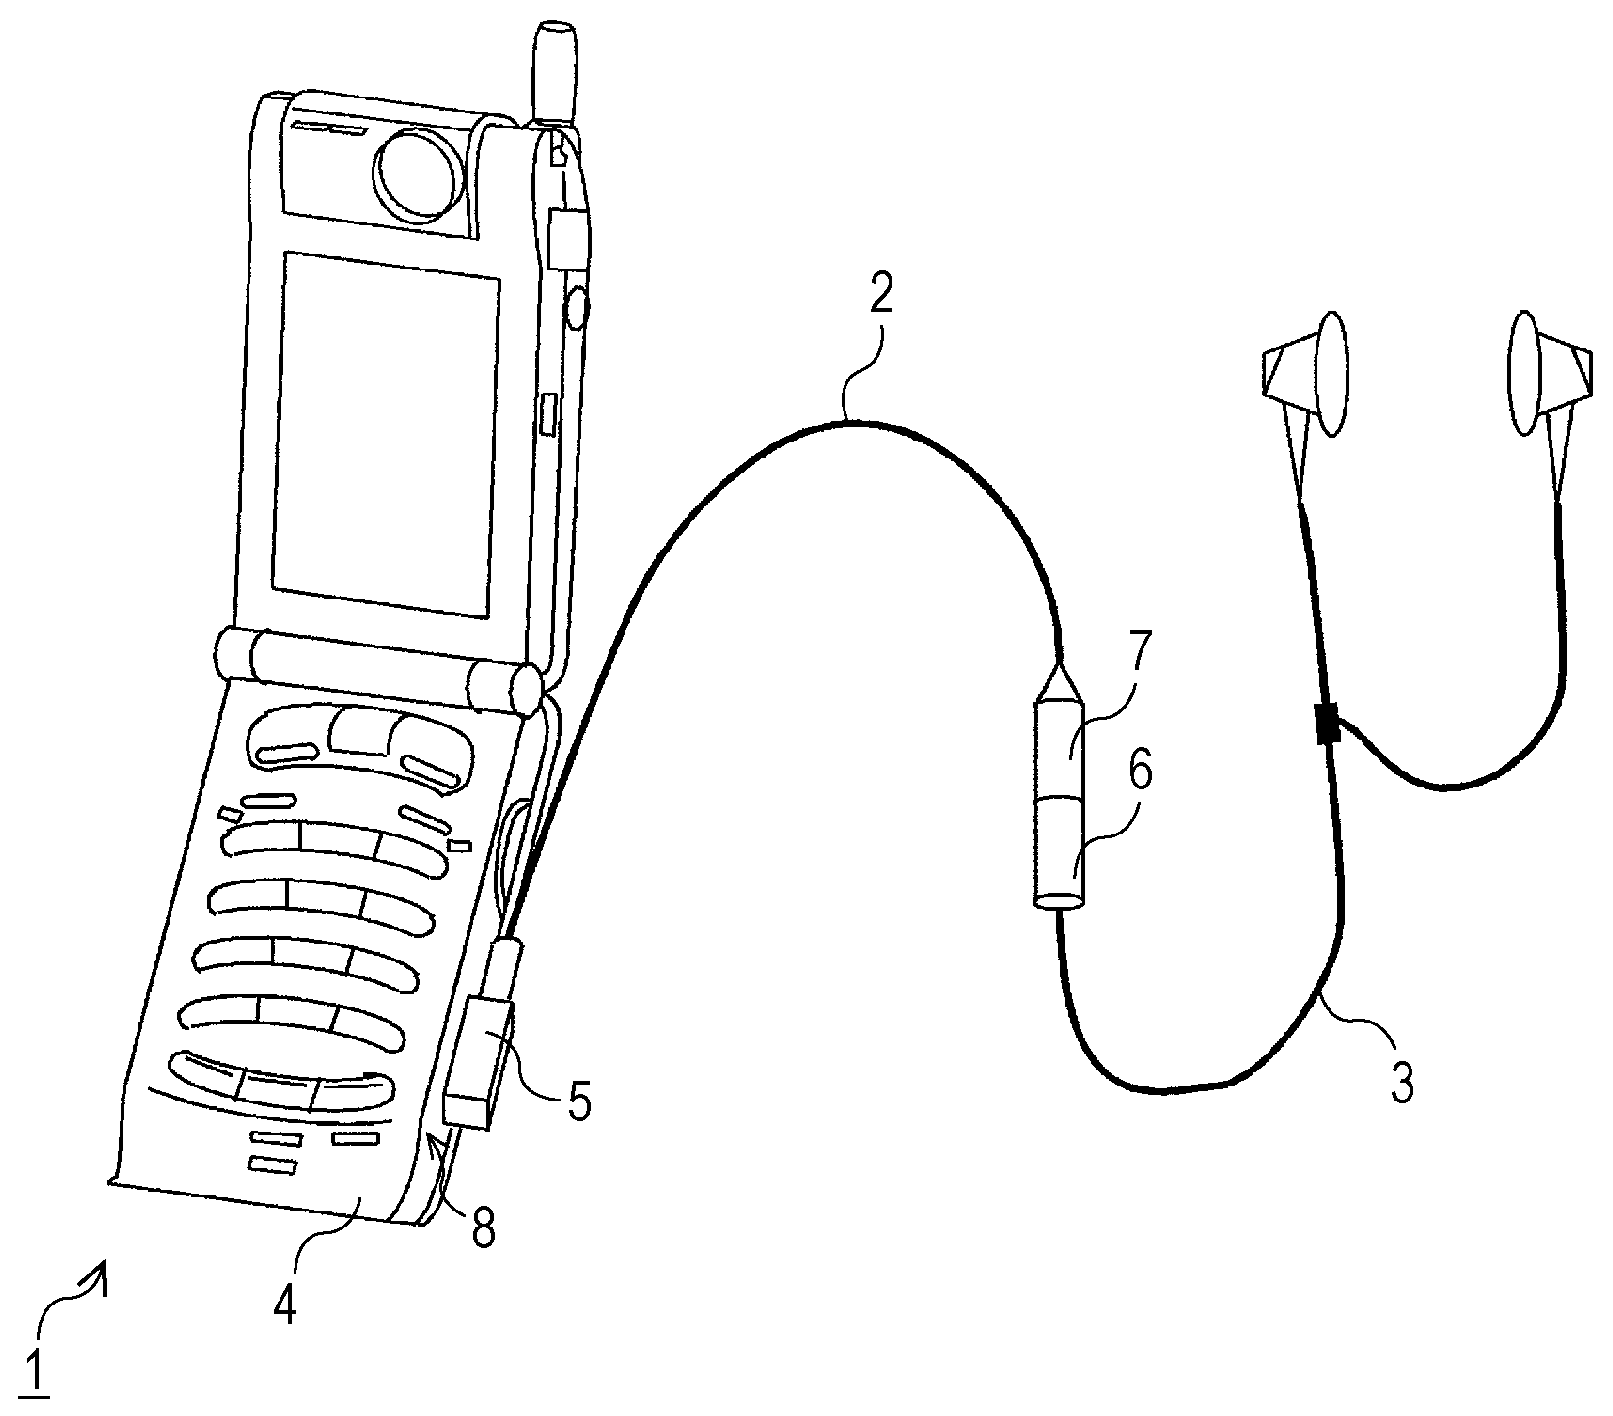 Reception device, antenna, and junction cable